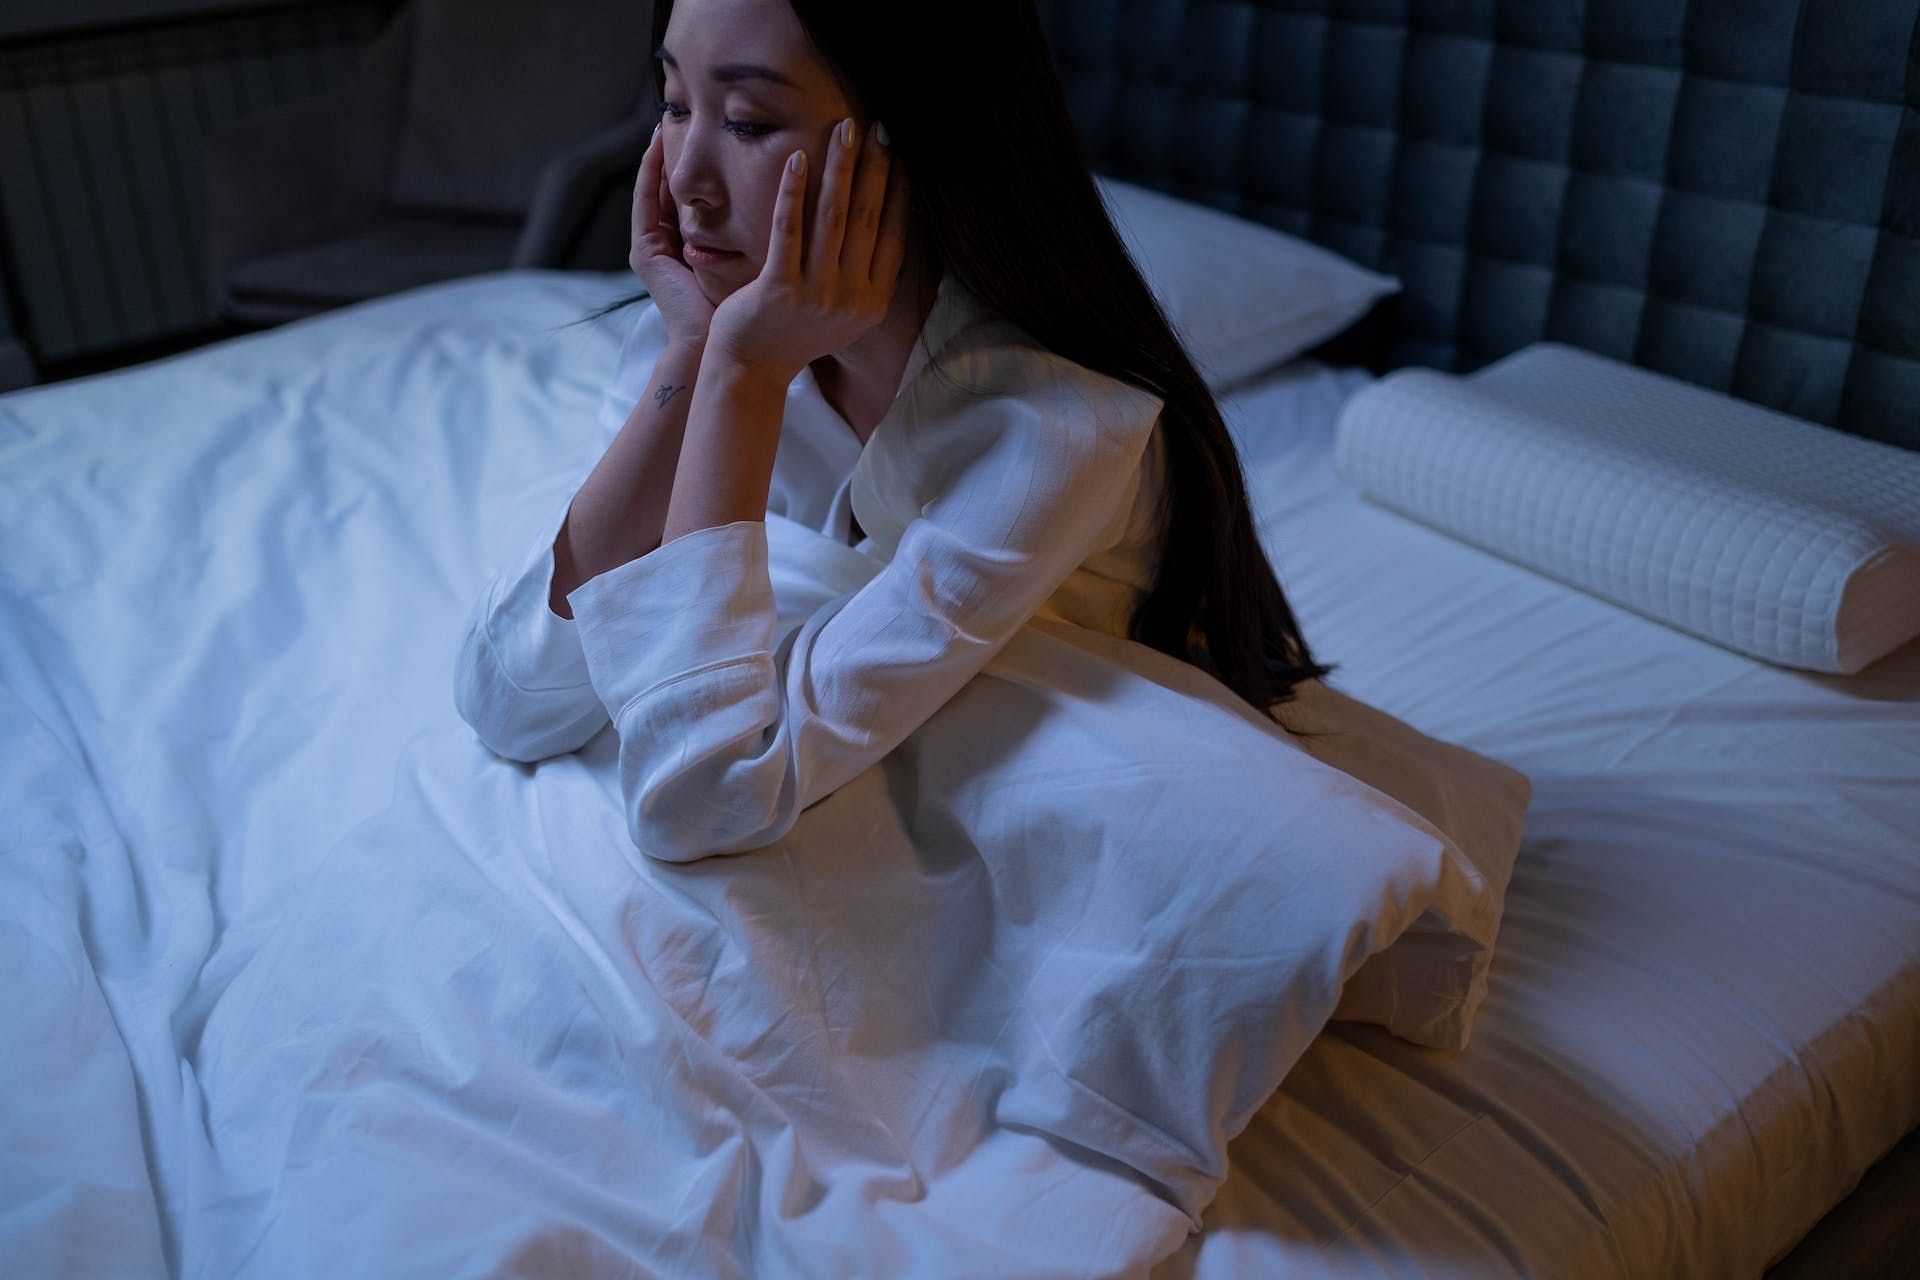 Trouble sleeping is a sign of too much sugar in the body. (Image via Pexels/cottonbro studio)